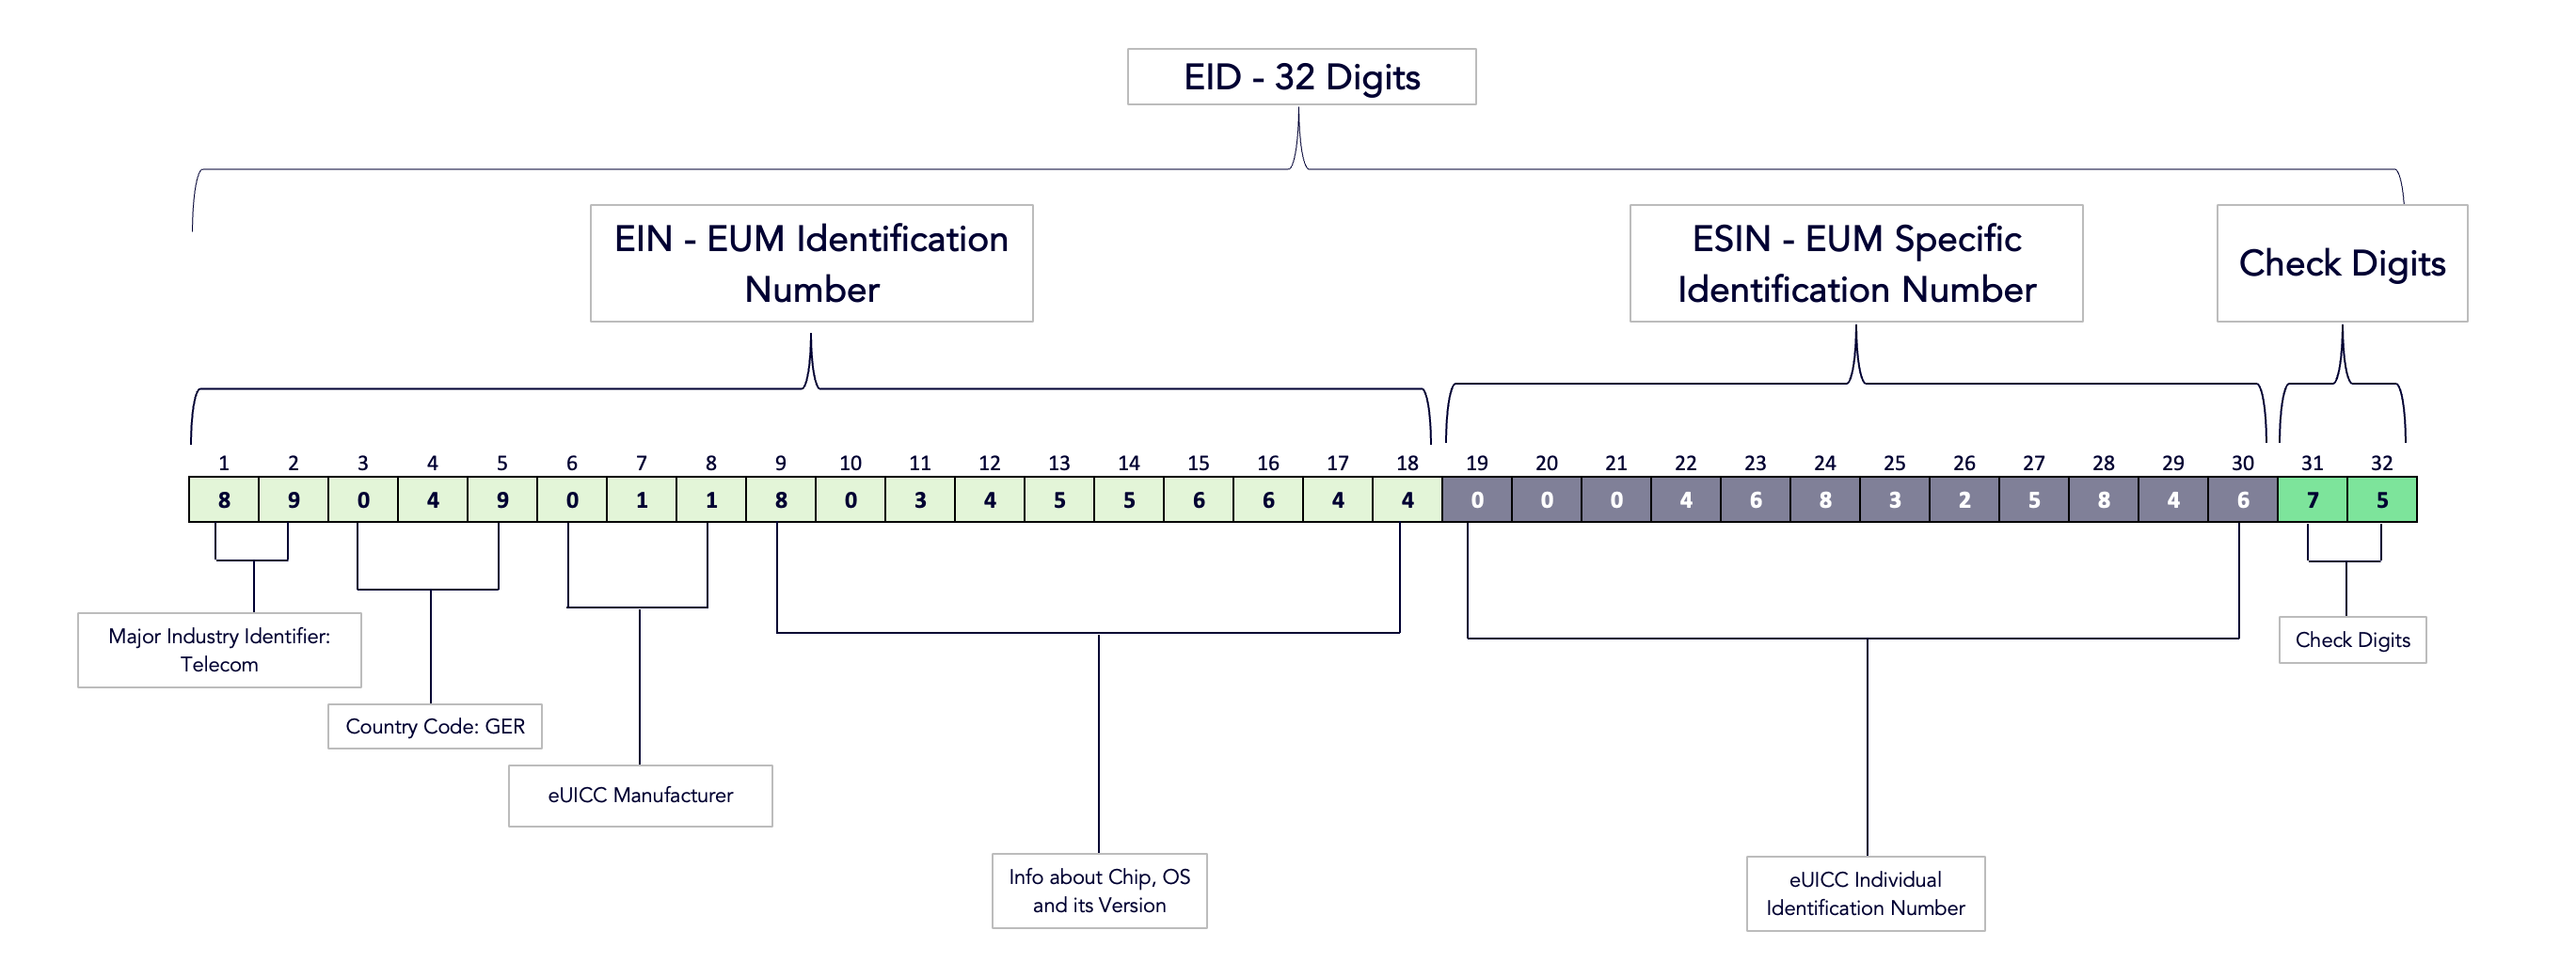 A 32-digit EID number: &quot;89049011803455664400046832584675&quot; The first 18 digits are the EUM Identification Number (EIN). Within those 18 digits, the first two digits are the Major Industry Identifier (Telecom in this example). The next three digits are the Country Code (GER in this example). The next three digits are the eUICC Manufacturer. The final 10 digits of the EIN contain information about the chip, OS, and its version. After the EIN, the following 11 digits are the EUM Specific Identification Number (ESIN). This value is also the eUICC Individual Identification Number. The final two digits of the EID are the Check Digits.